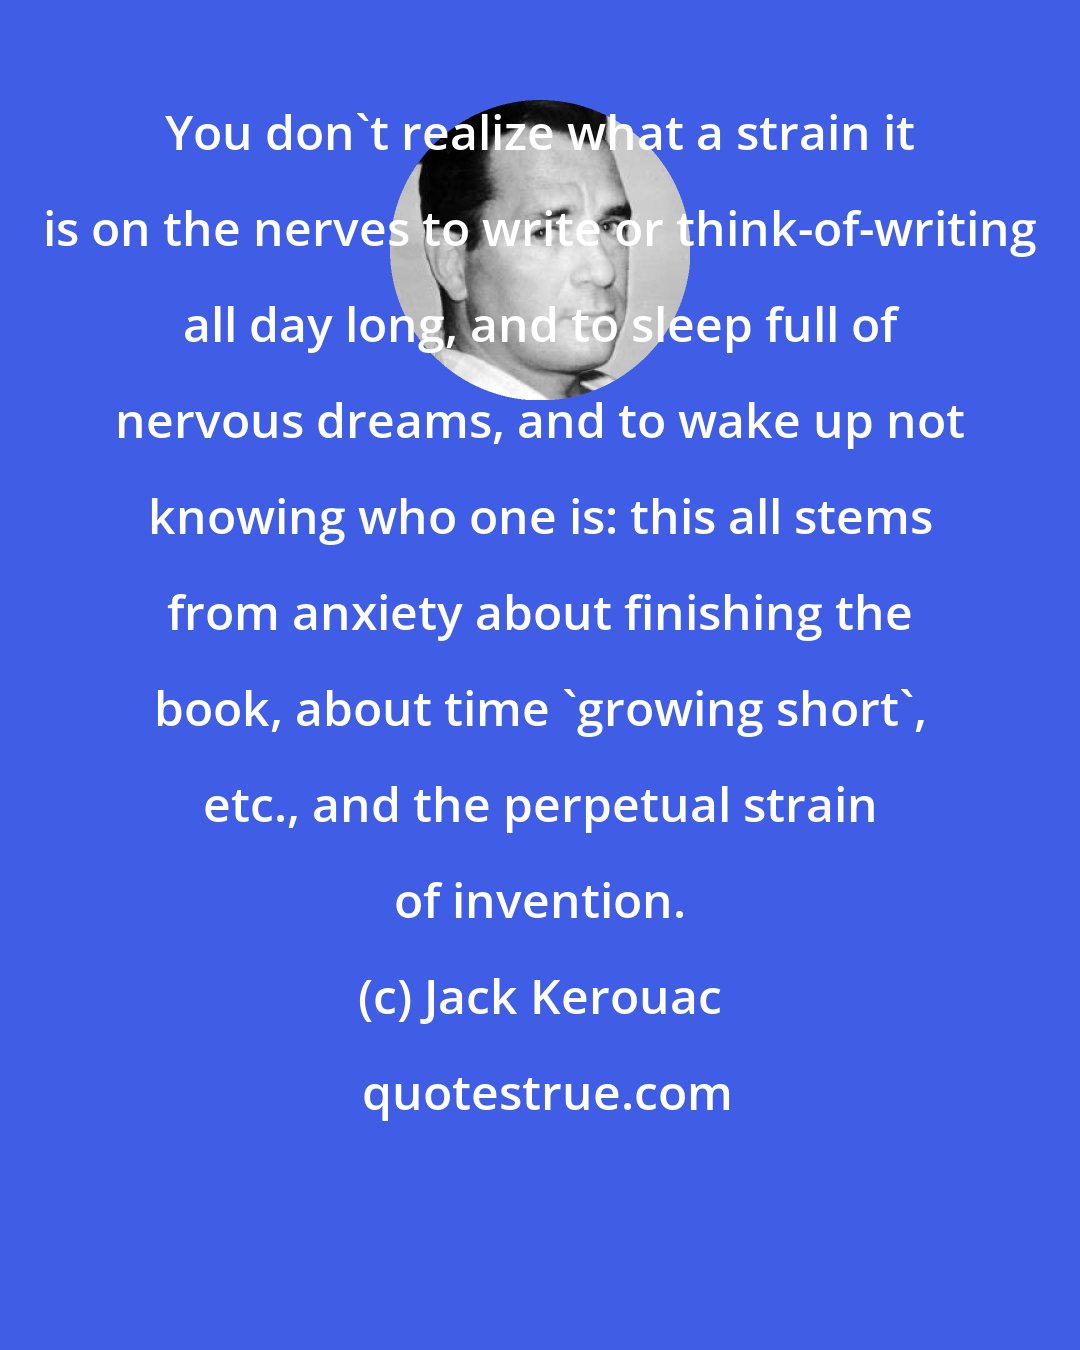 Jack Kerouac: You don't realize what a strain it is on the nerves to write or think-of-writing all day long, and to sleep full of nervous dreams, and to wake up not knowing who one is: this all stems from anxiety about finishing the book, about time 'growing short', etc., and the perpetual strain of invention.